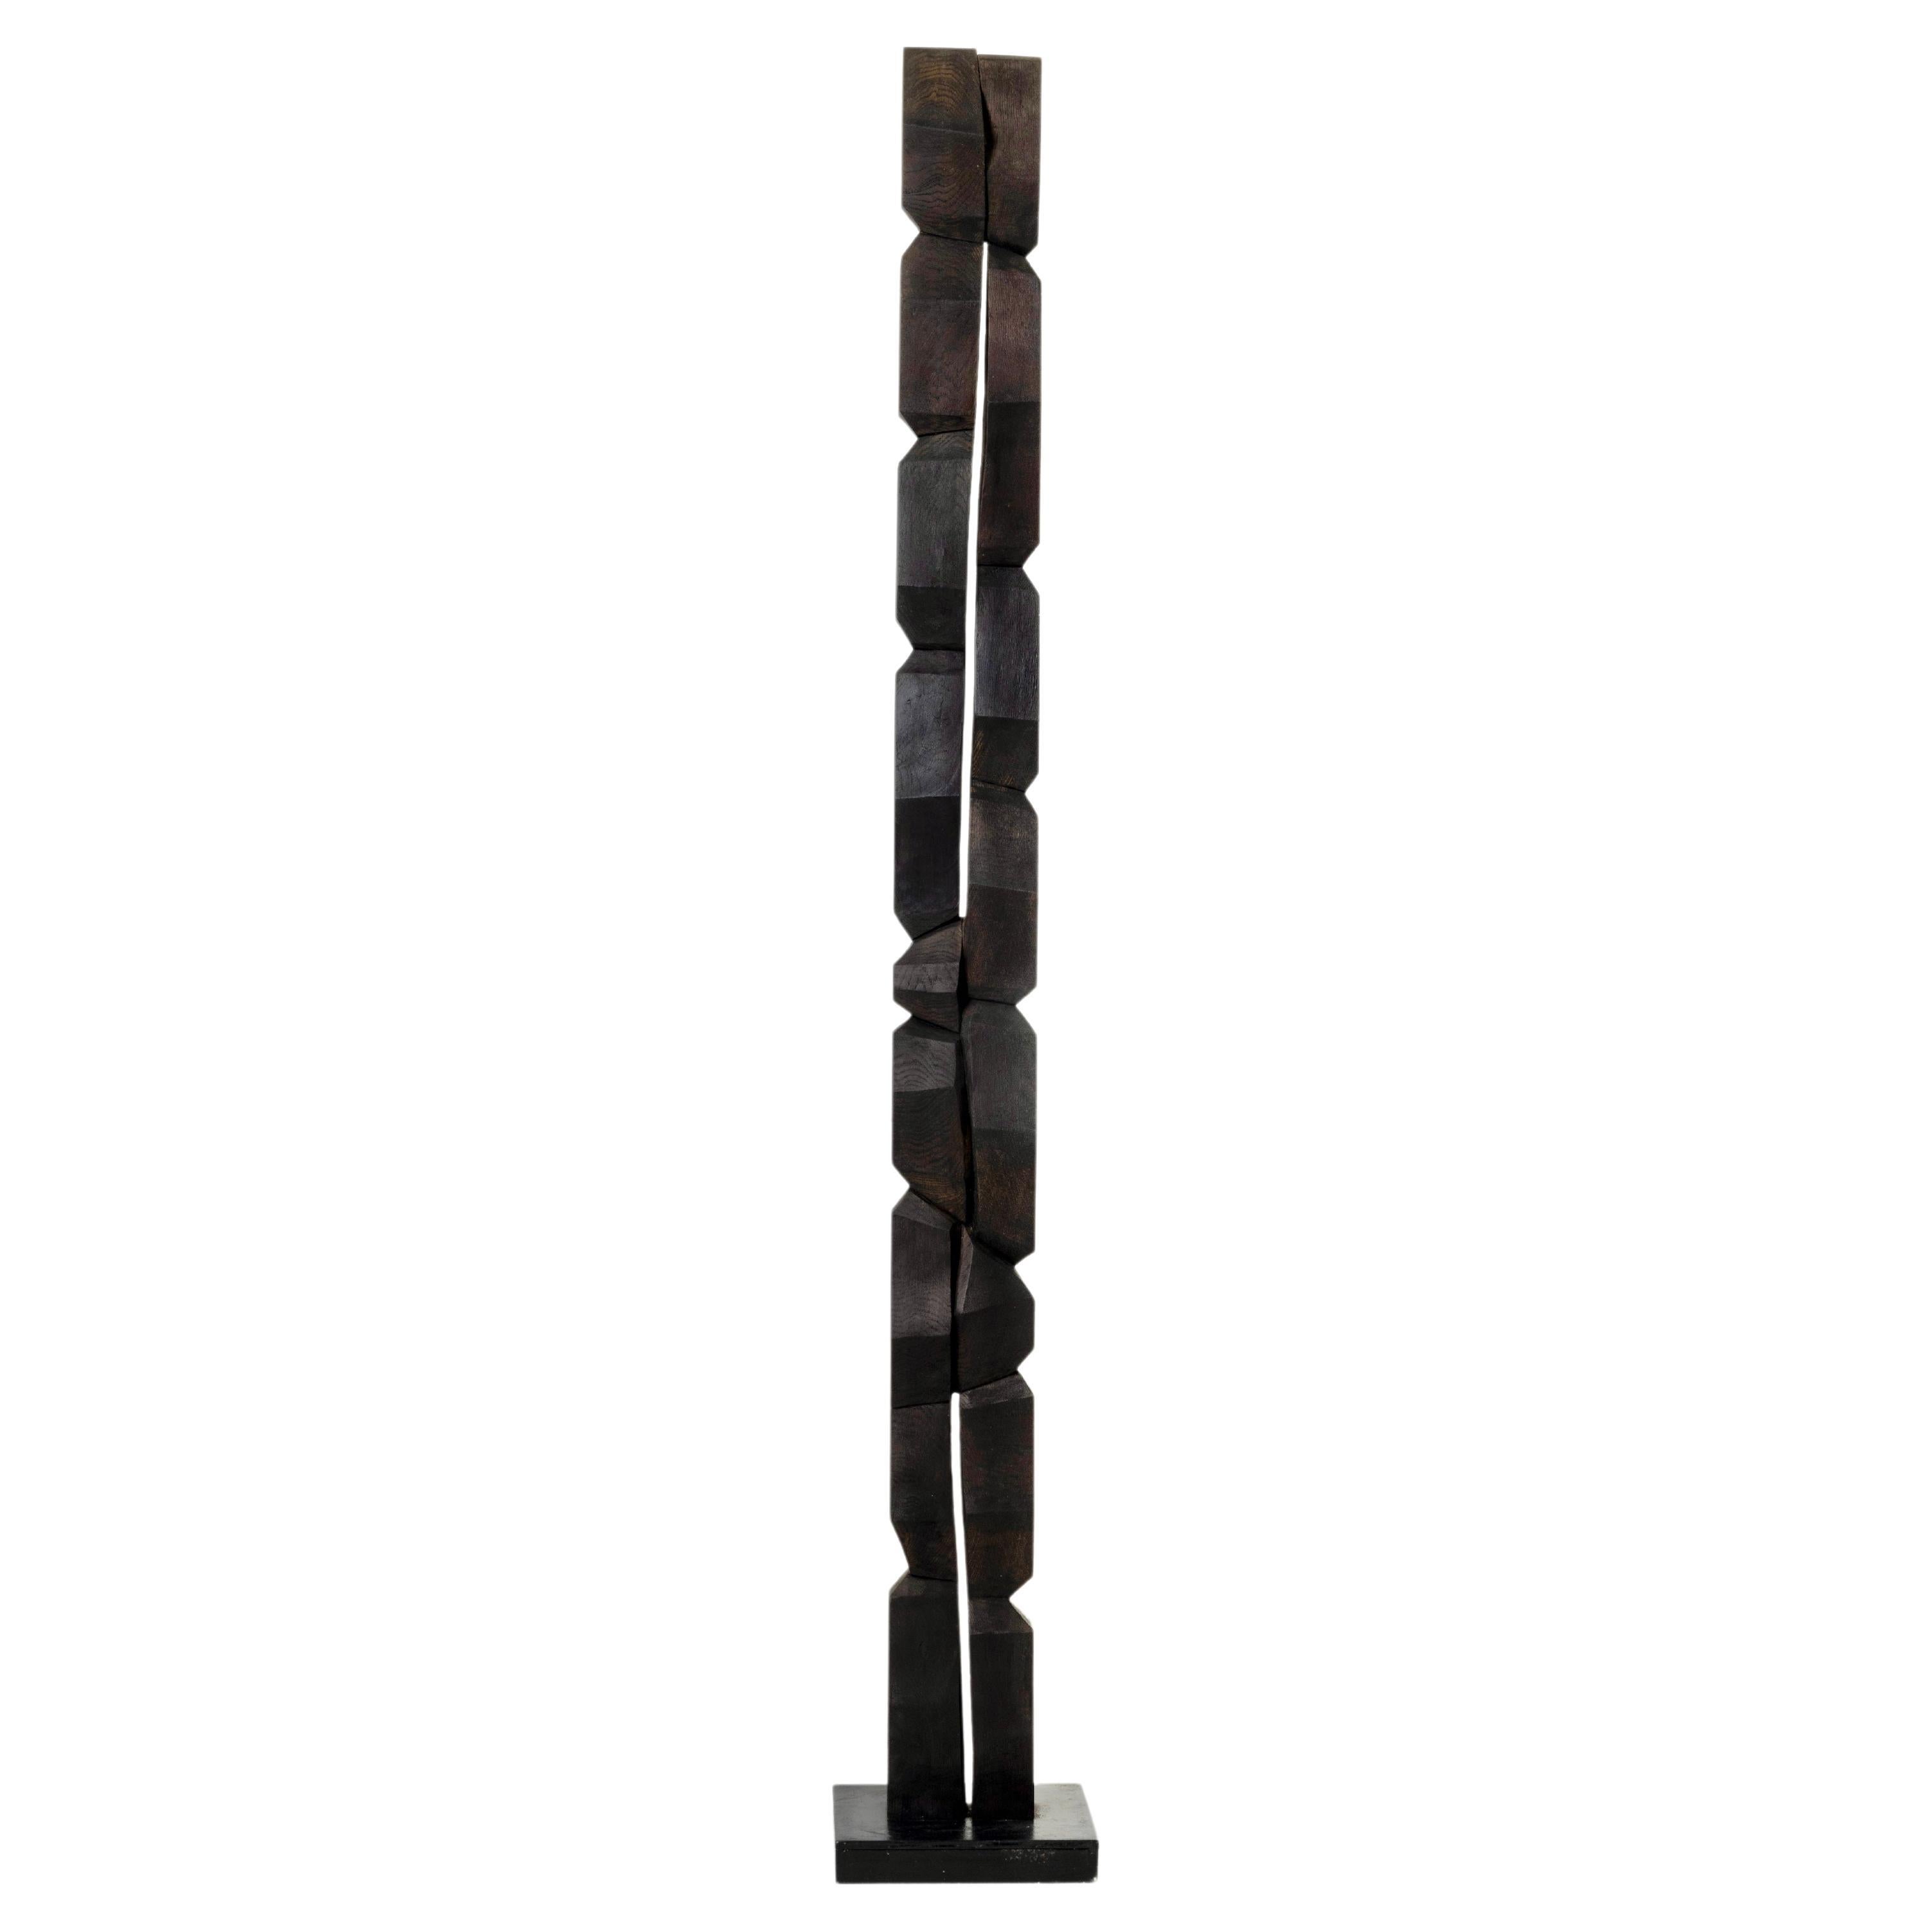 Contemporary Wooden Totem Sculpture by Bertrand Créac'h, France